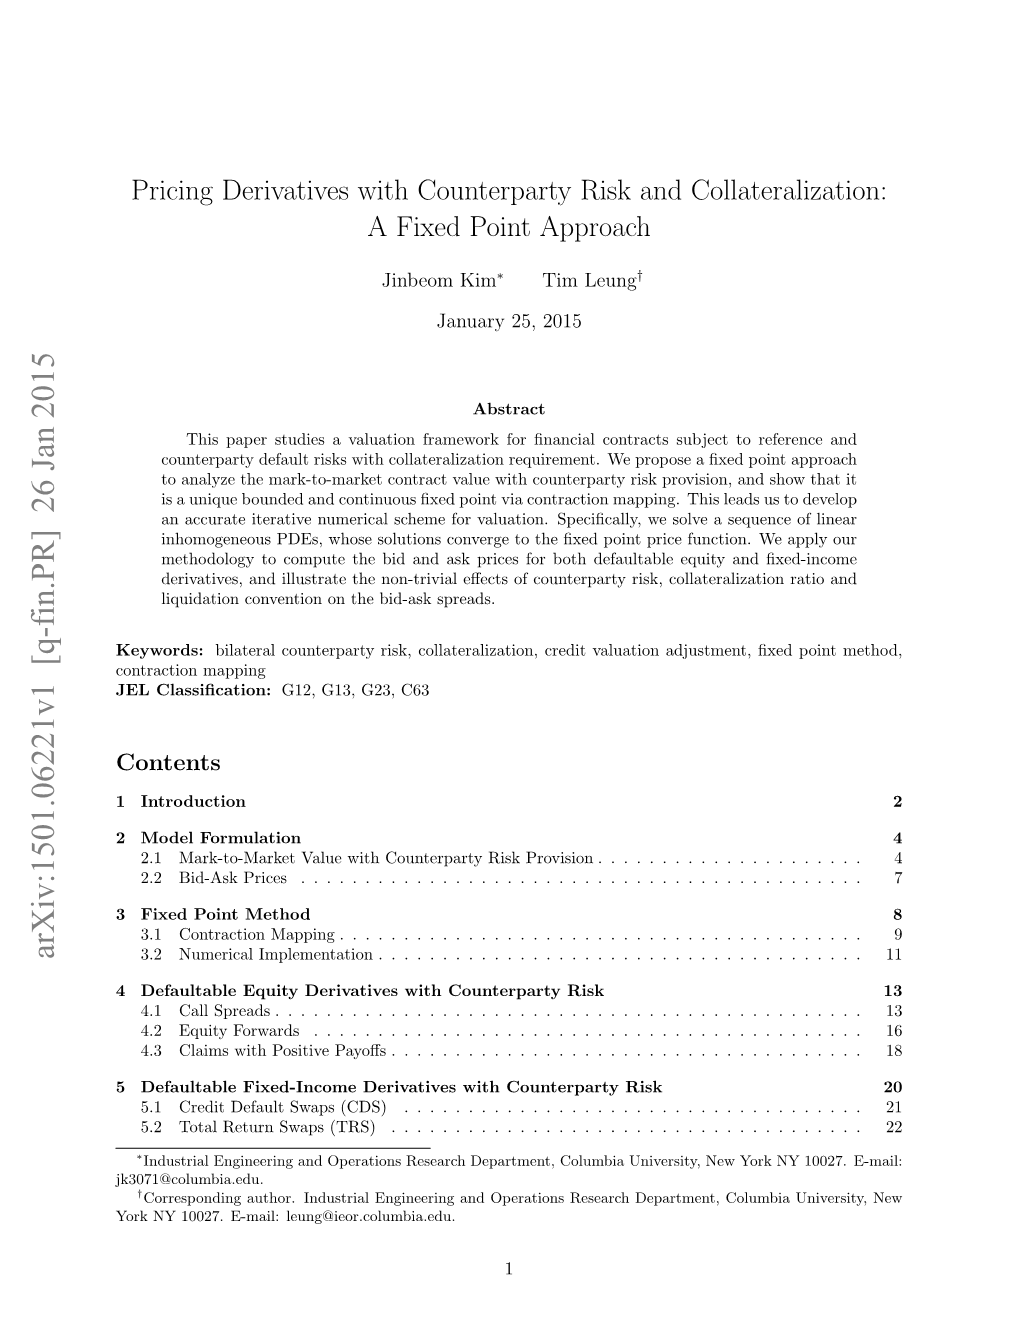 Pricing Derivatives with Counterparty Risk and Collateralization: a Fixed Point Approach